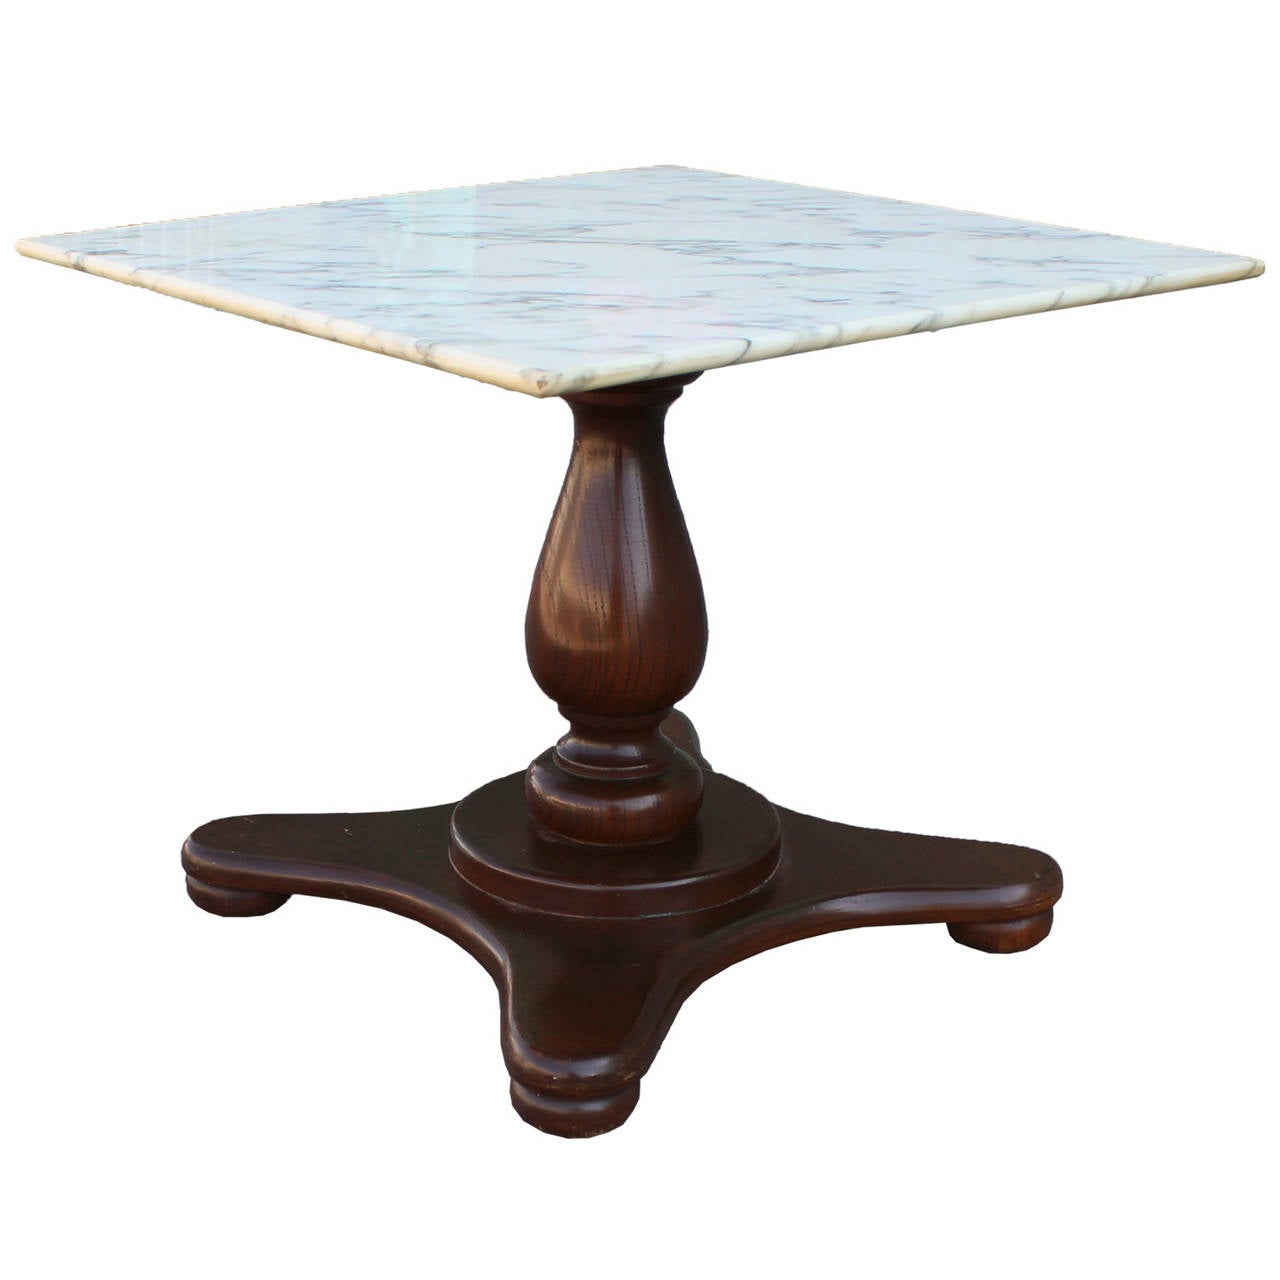 Beautiful white marble tops sit atop turned walnut bases. Perfect transitional pieces.